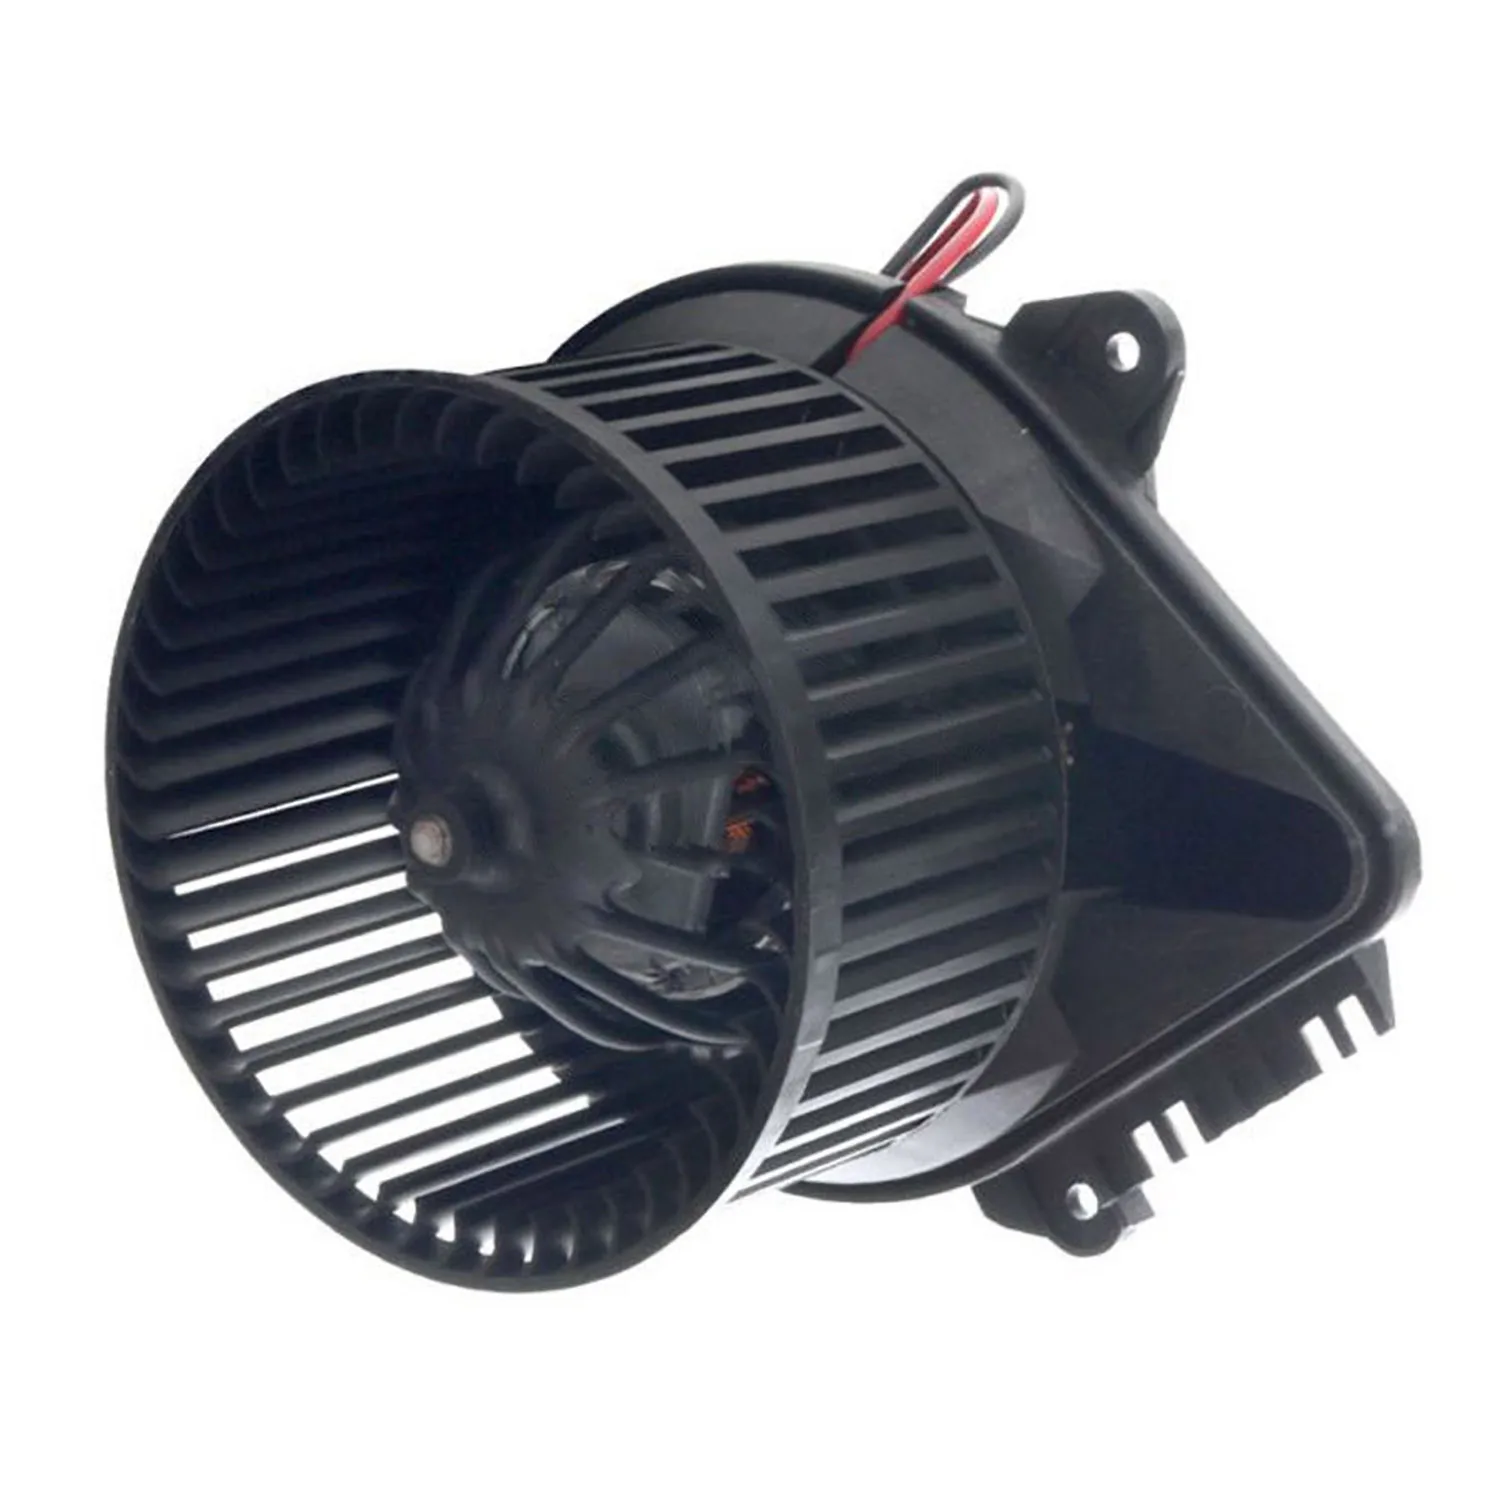 

Air Conditioning Fan AC A/C Blower Motor FOR ISZ 12V MZZ0008 7701205443 698281 F657322C GV281